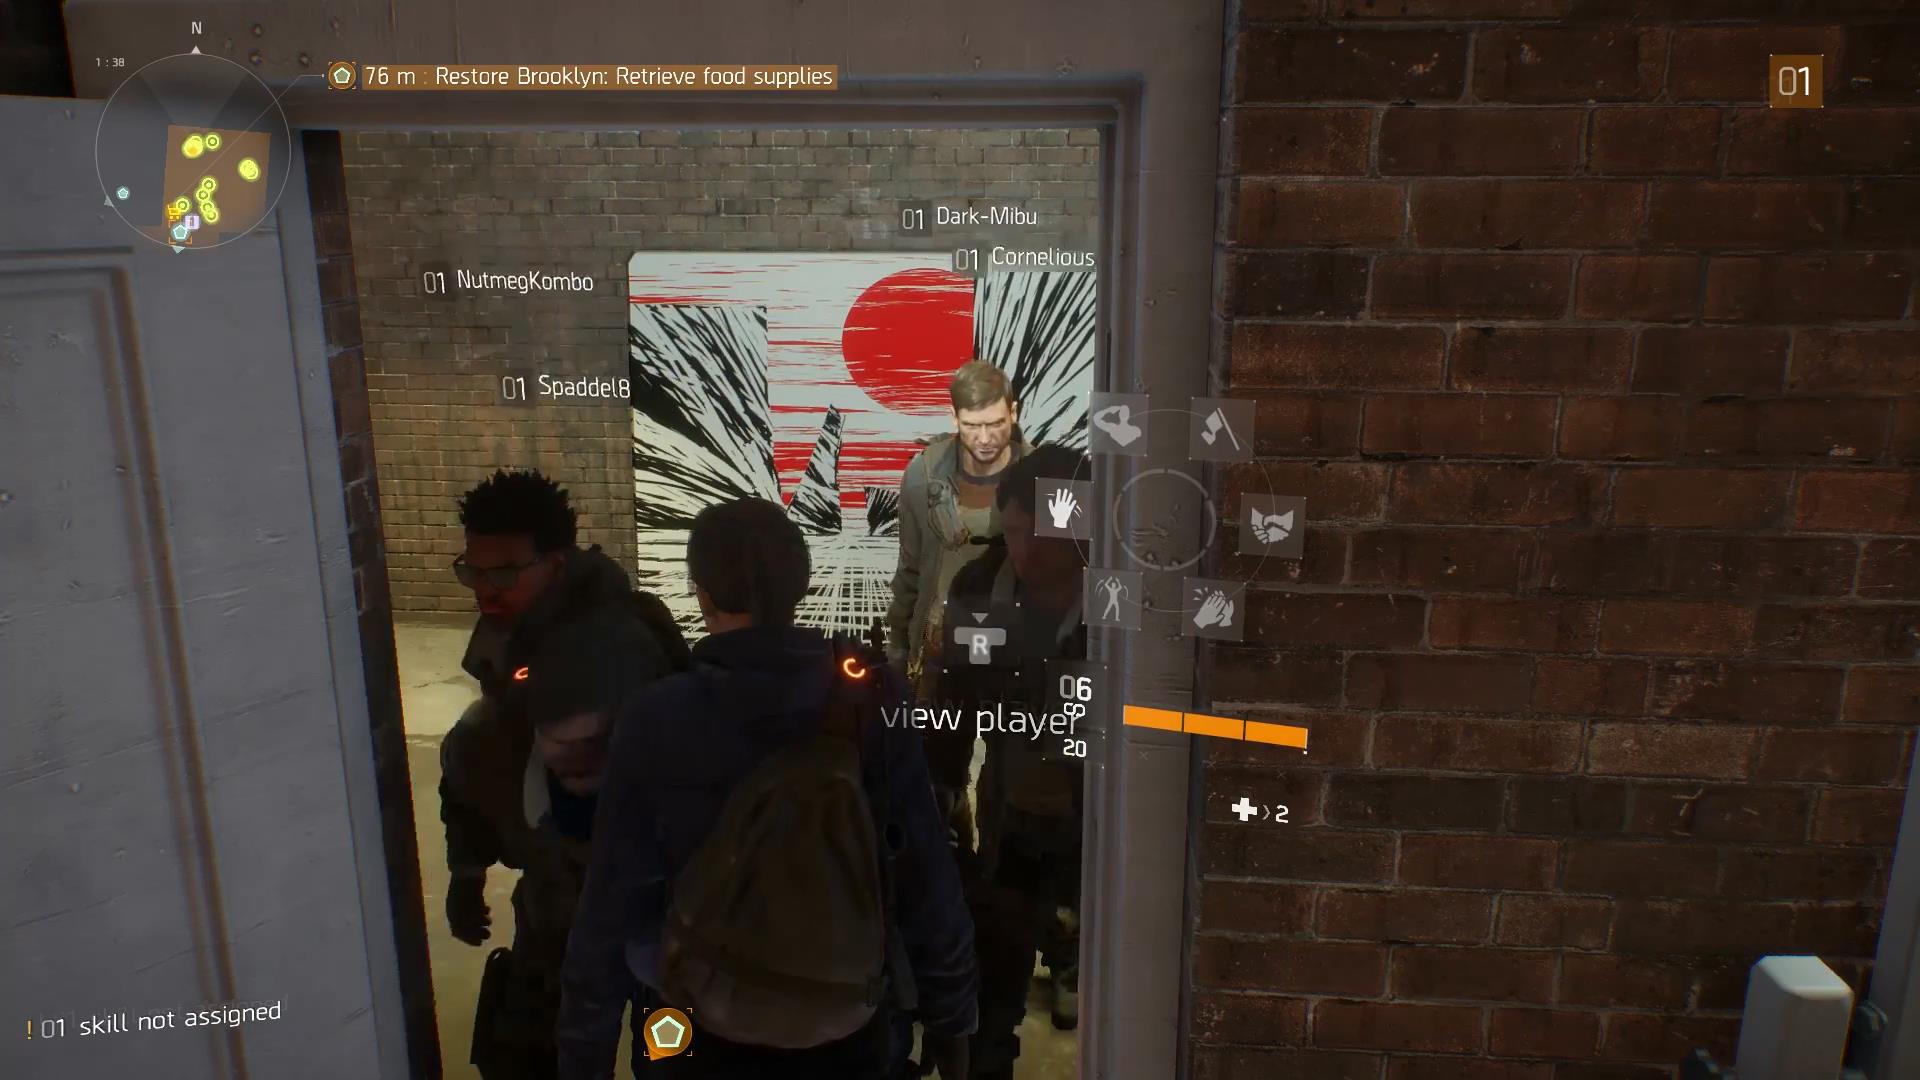 Tom Clancy's The Division griefing glitch